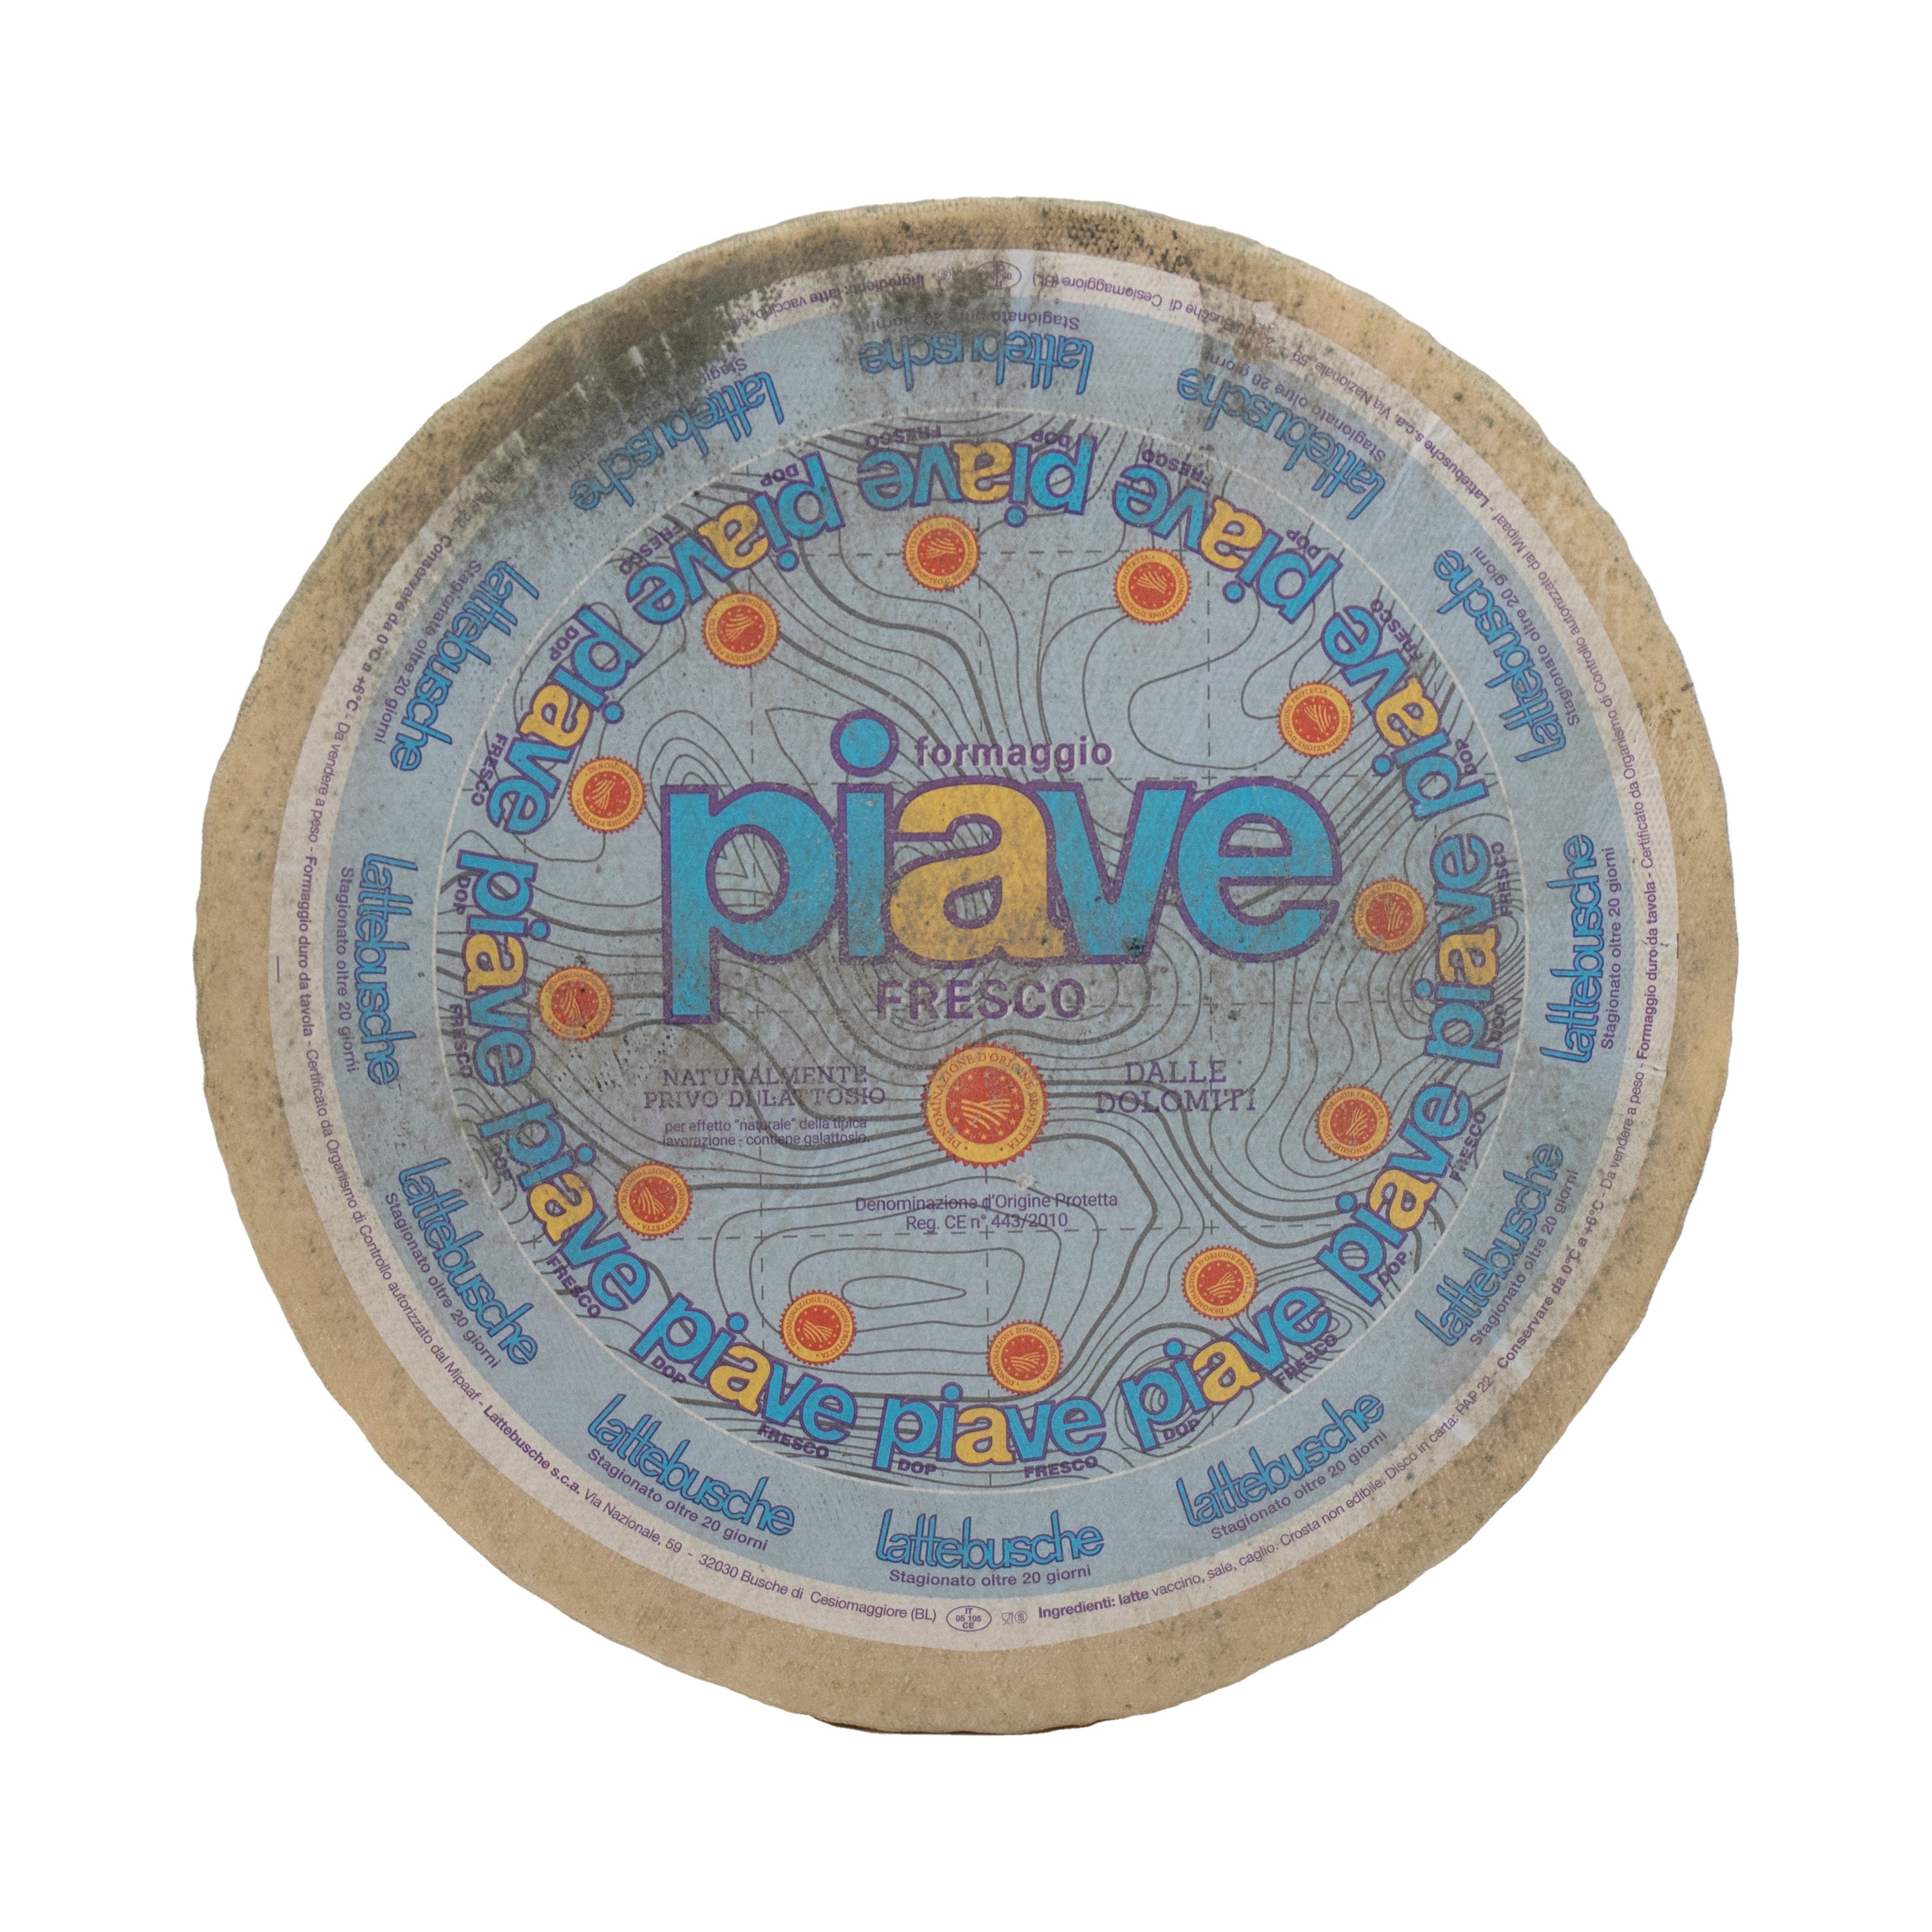 Agriform 1-3 Month Piave Cheese 13lb 1ct